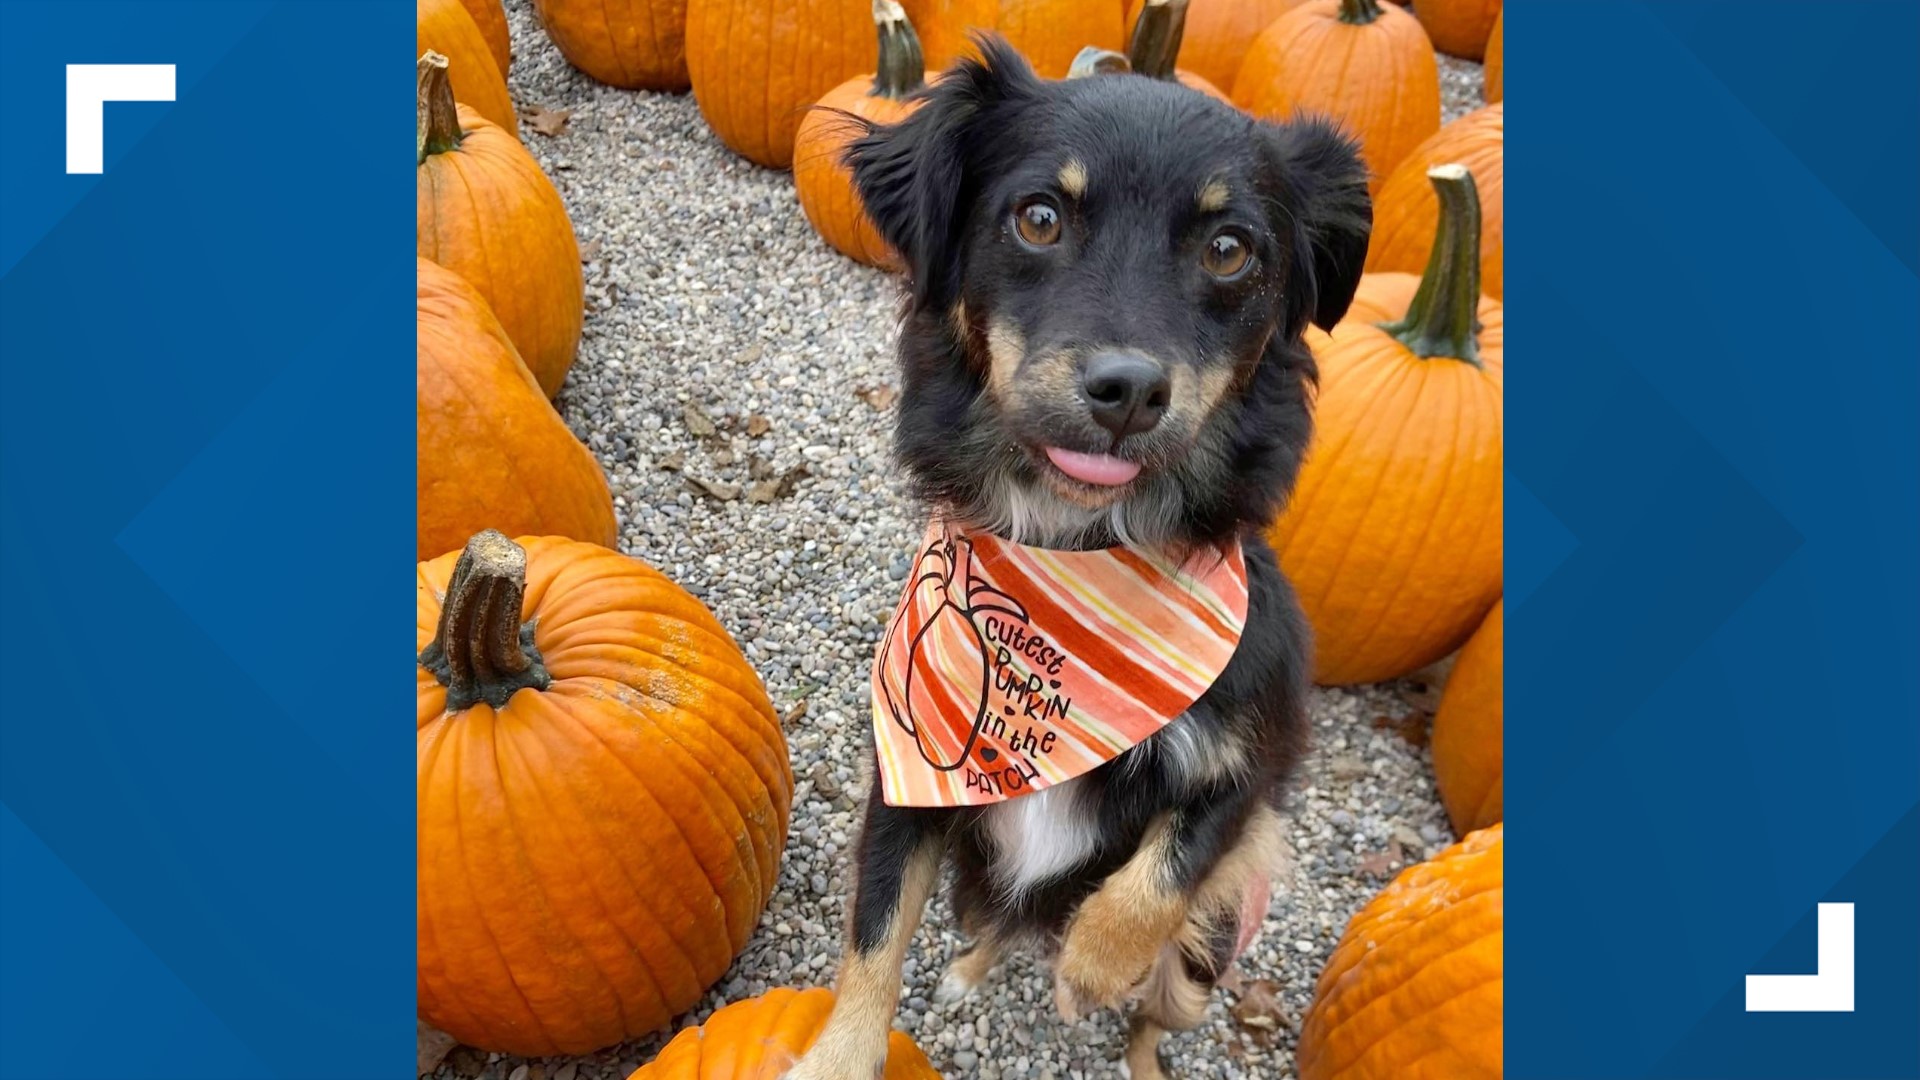 Grab your pup and head to the farm for fall fun with a great cause.